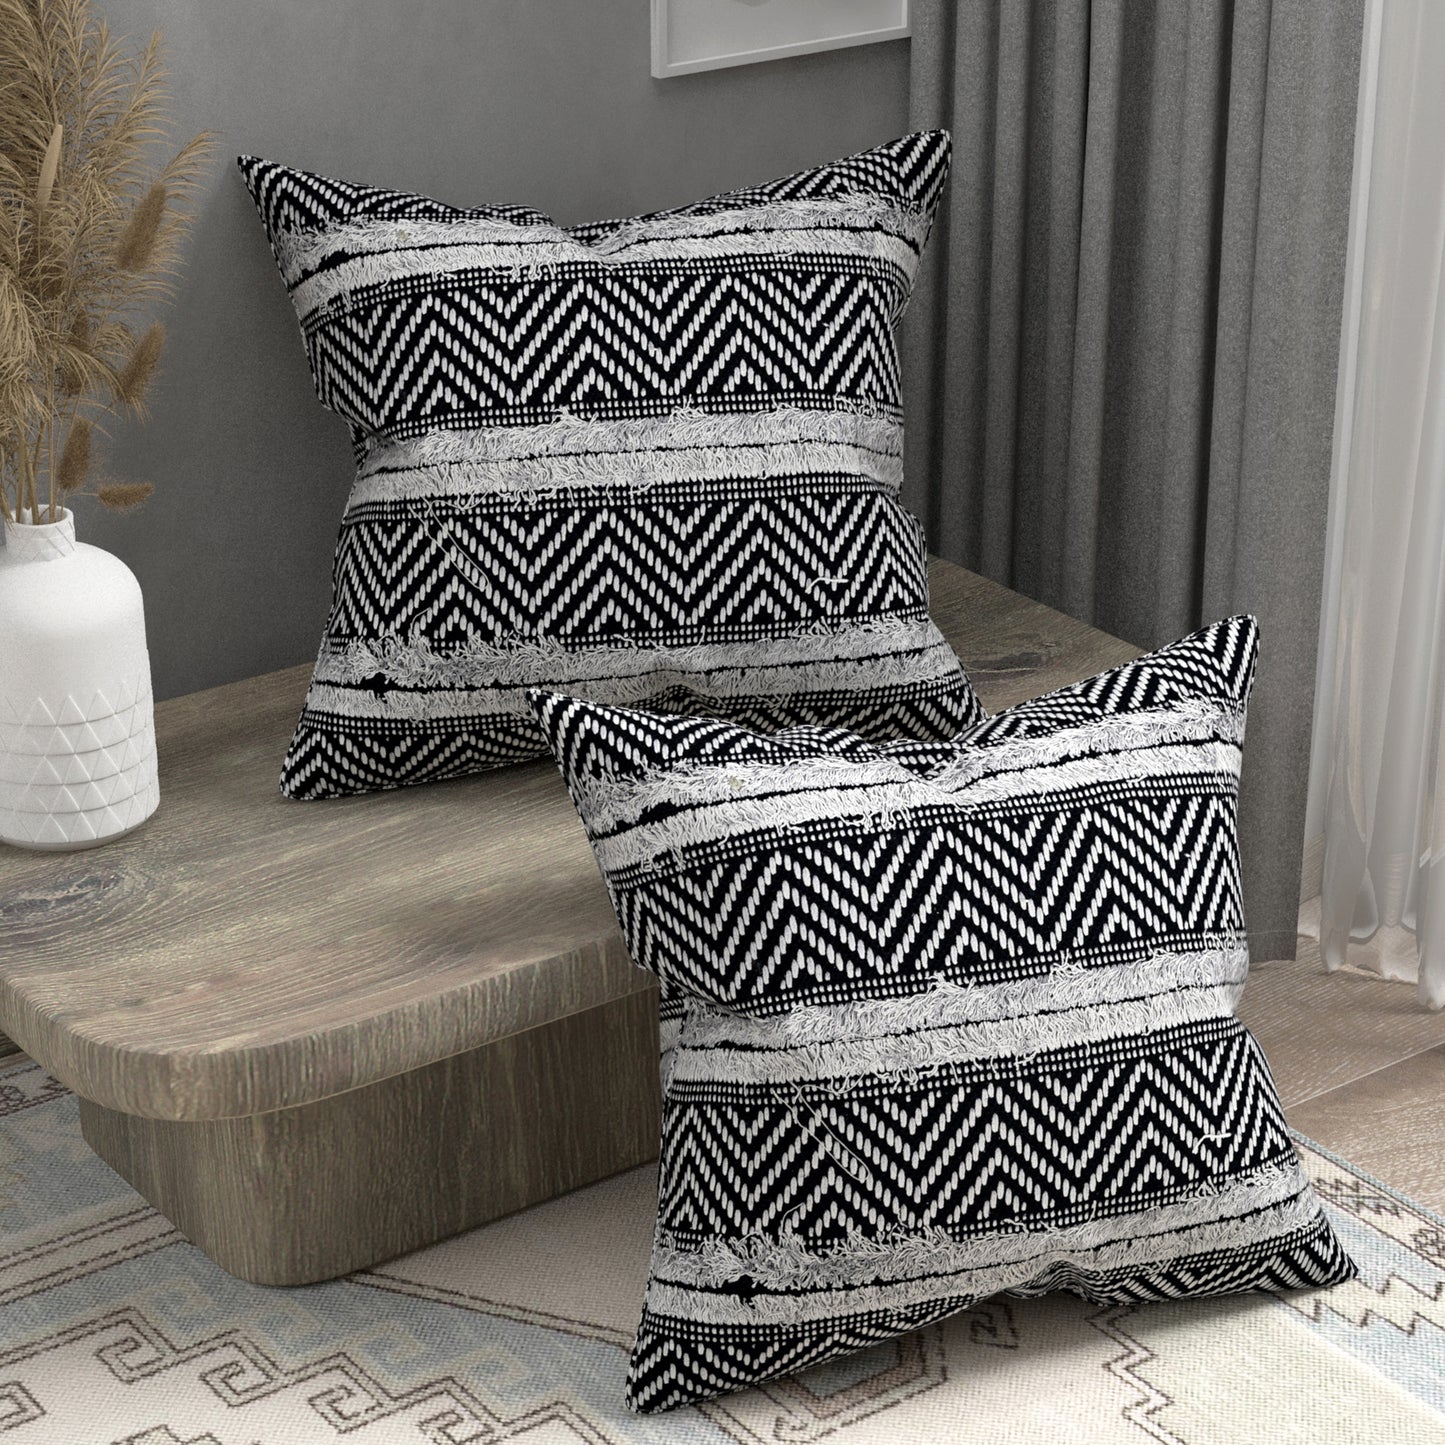 Set of 2 Cotton Cushion Covers - 16 Inches